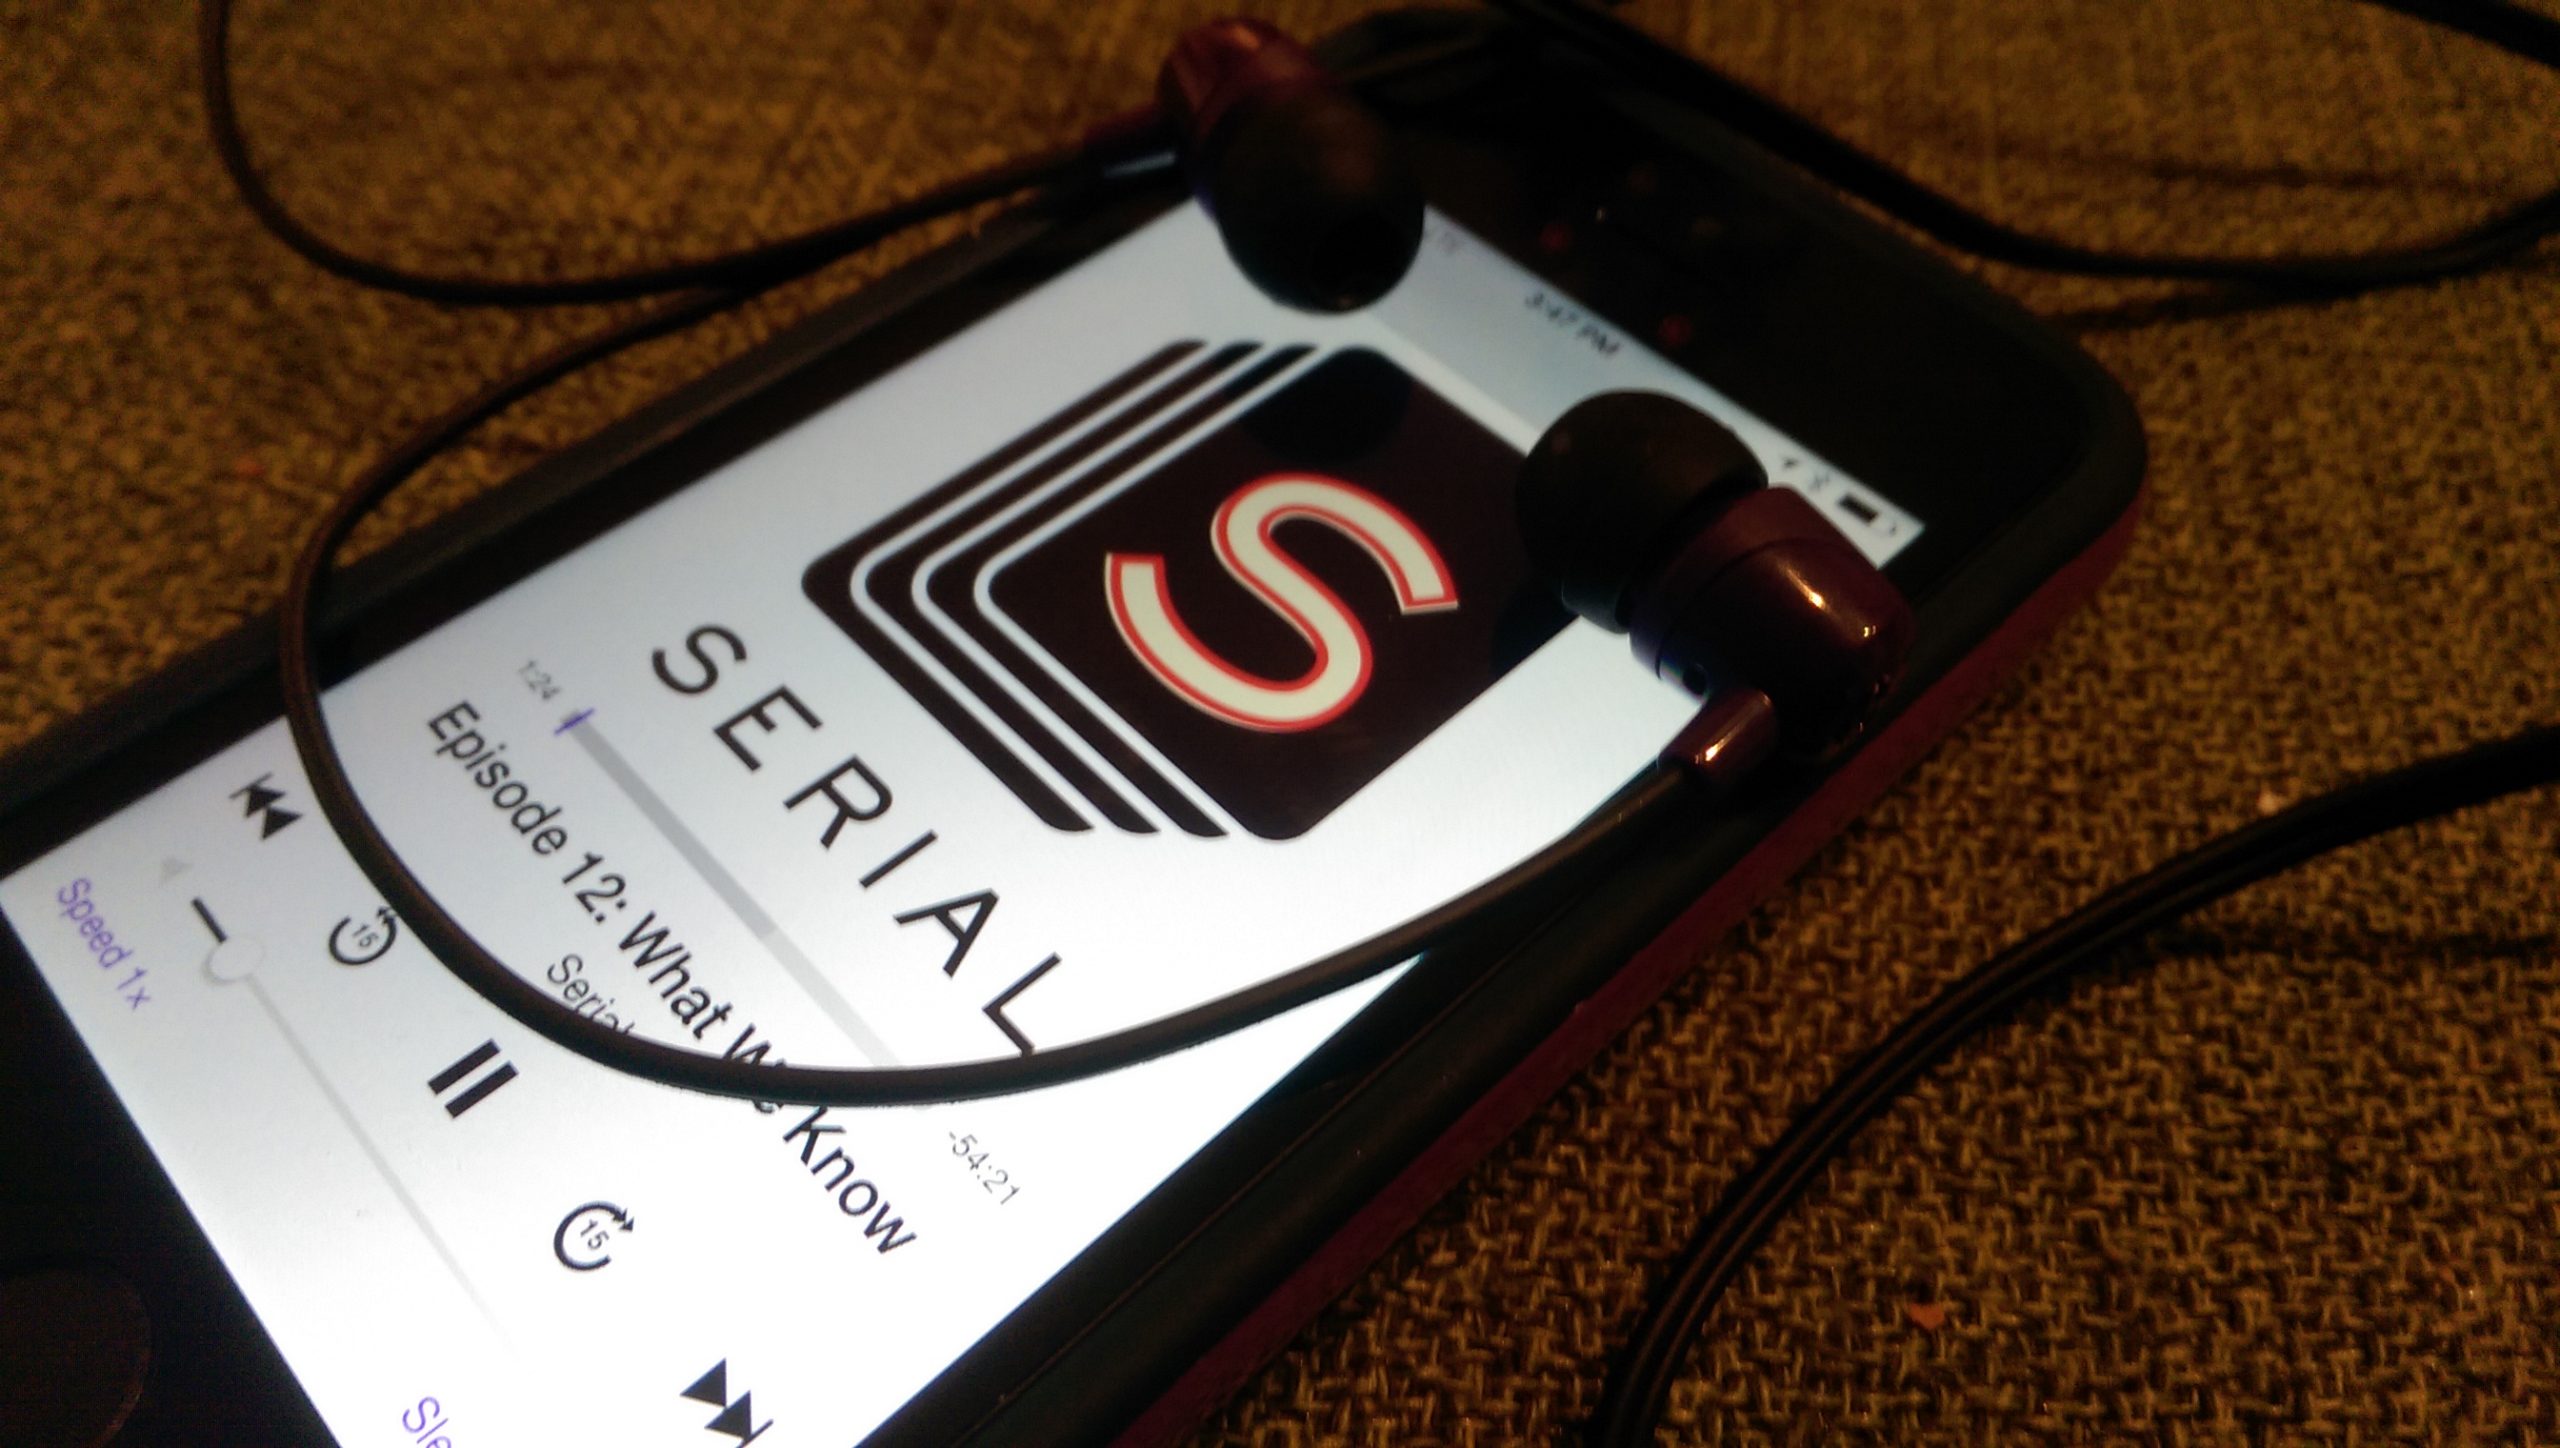 Serial Podcast (image by Casey Fiesler)